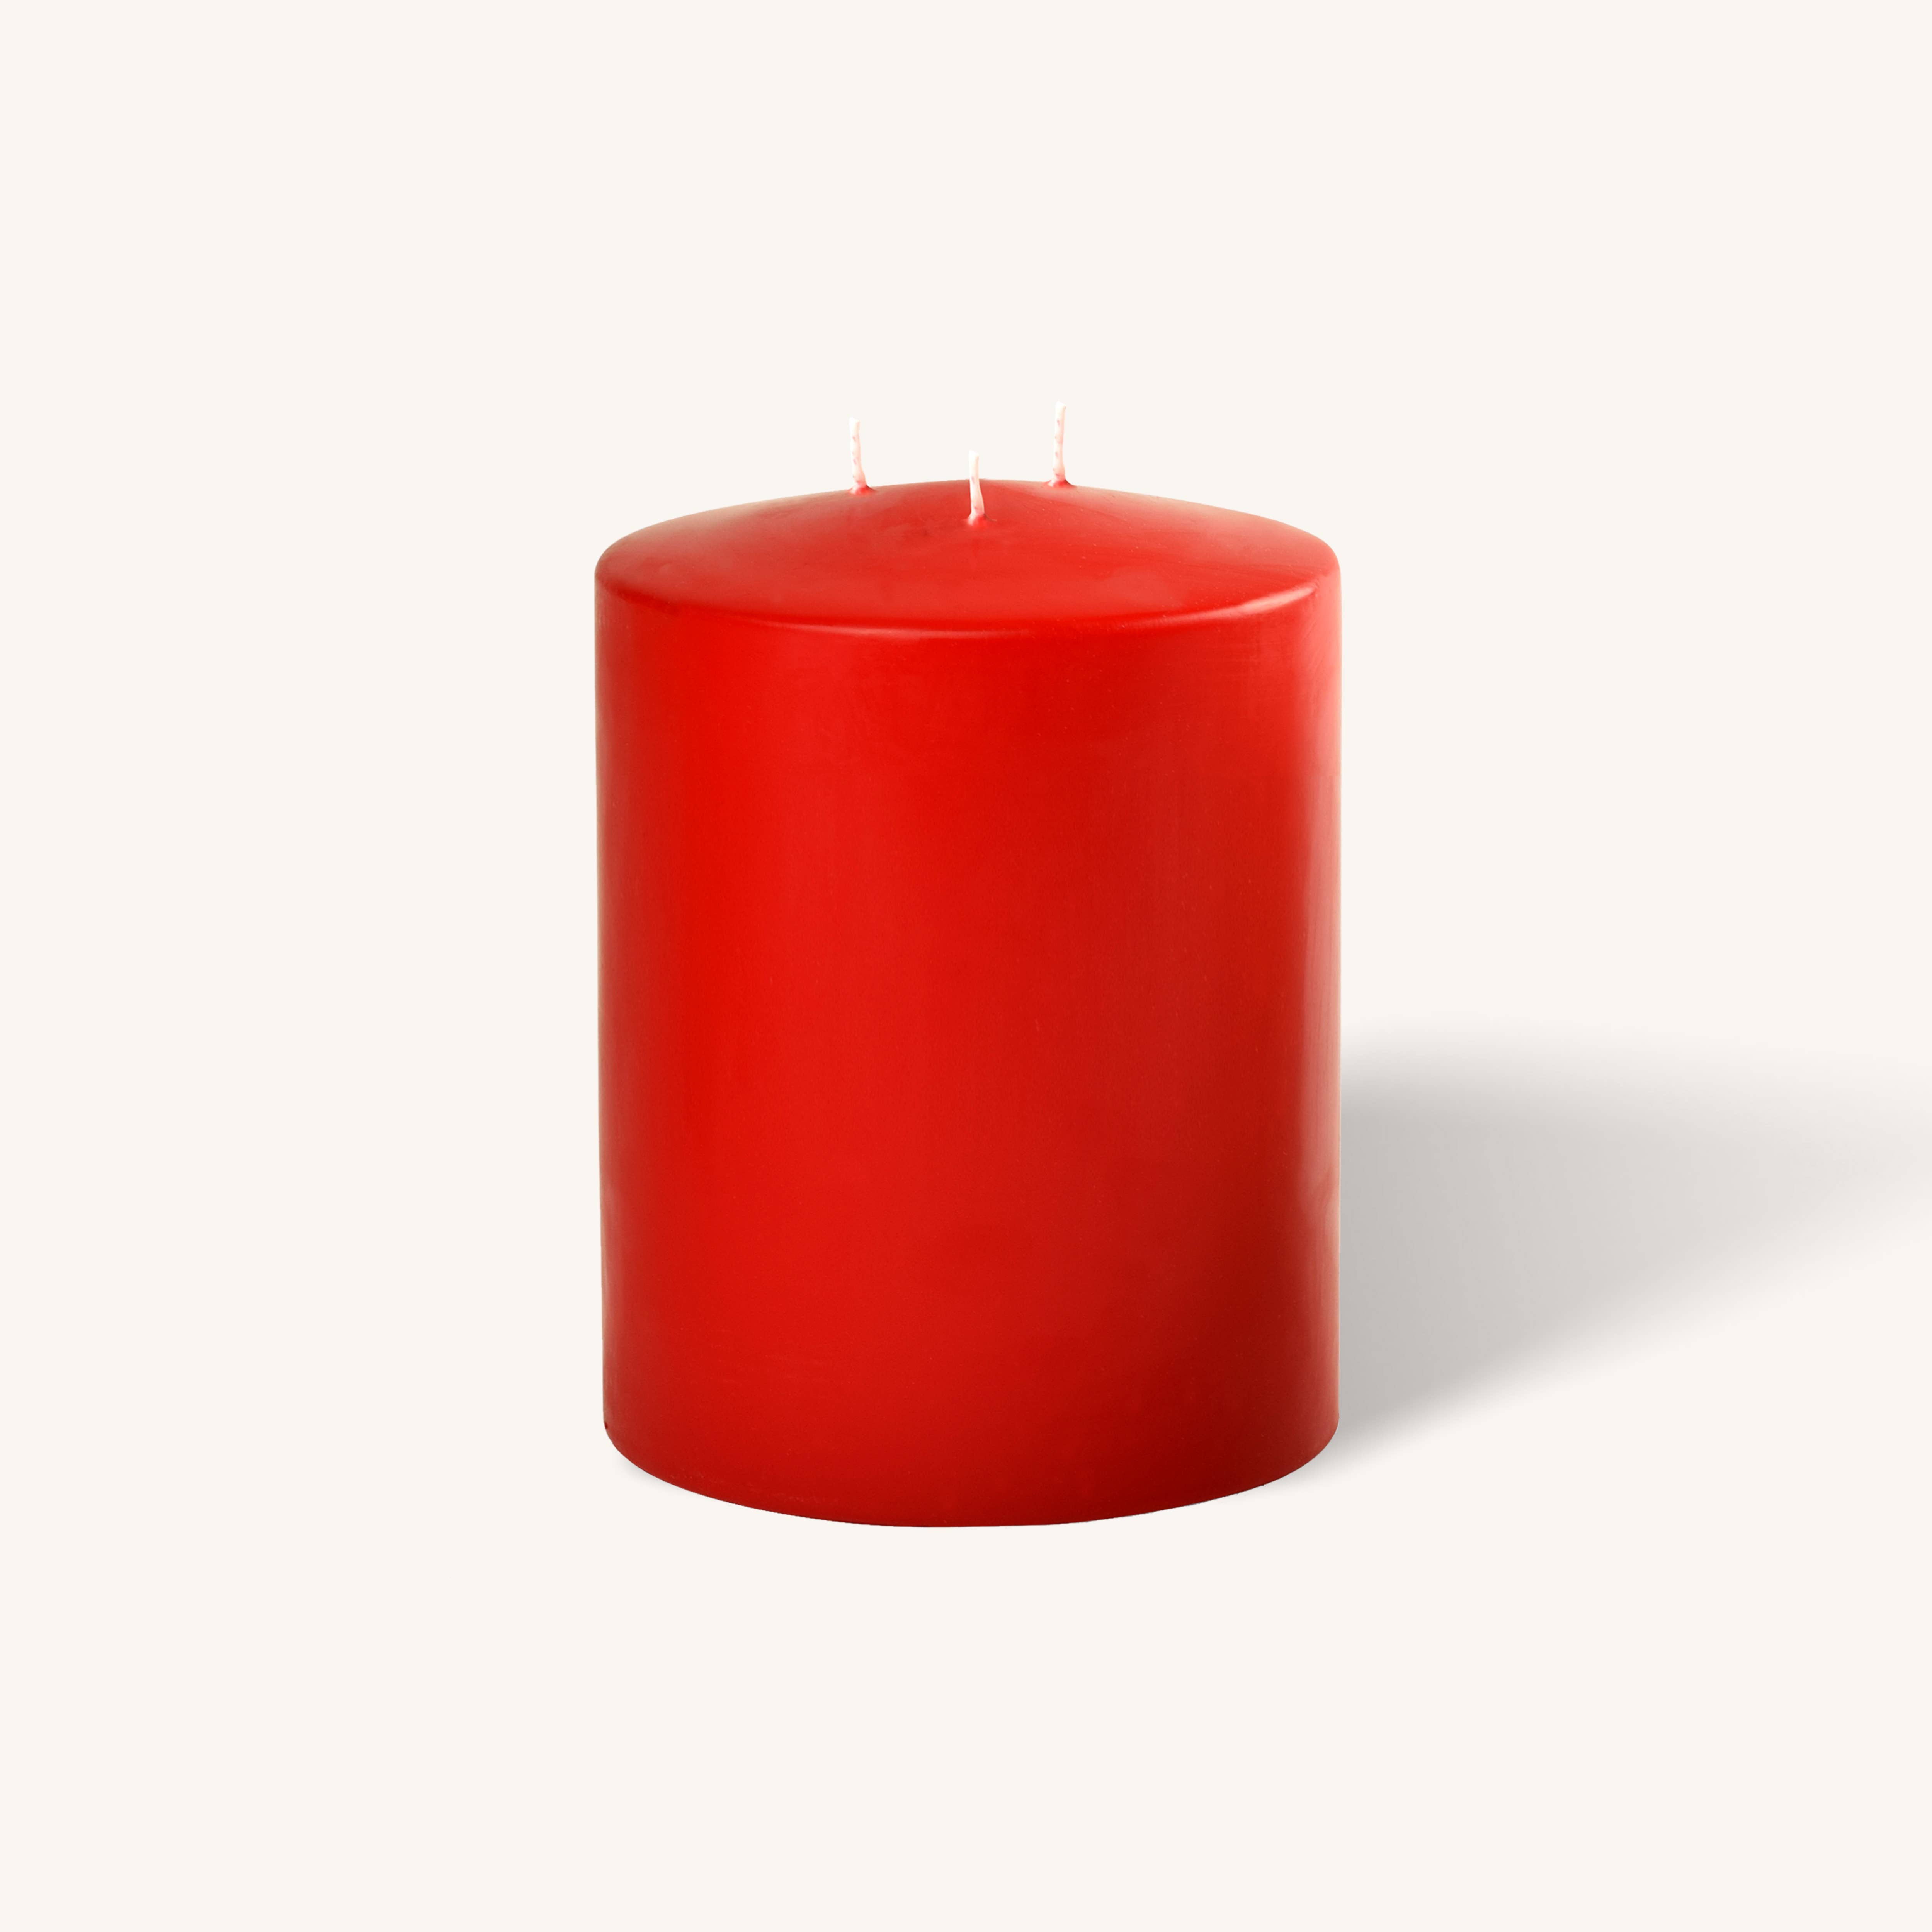 Red 3 Wick Pillar Candle - 4.75" x 6"